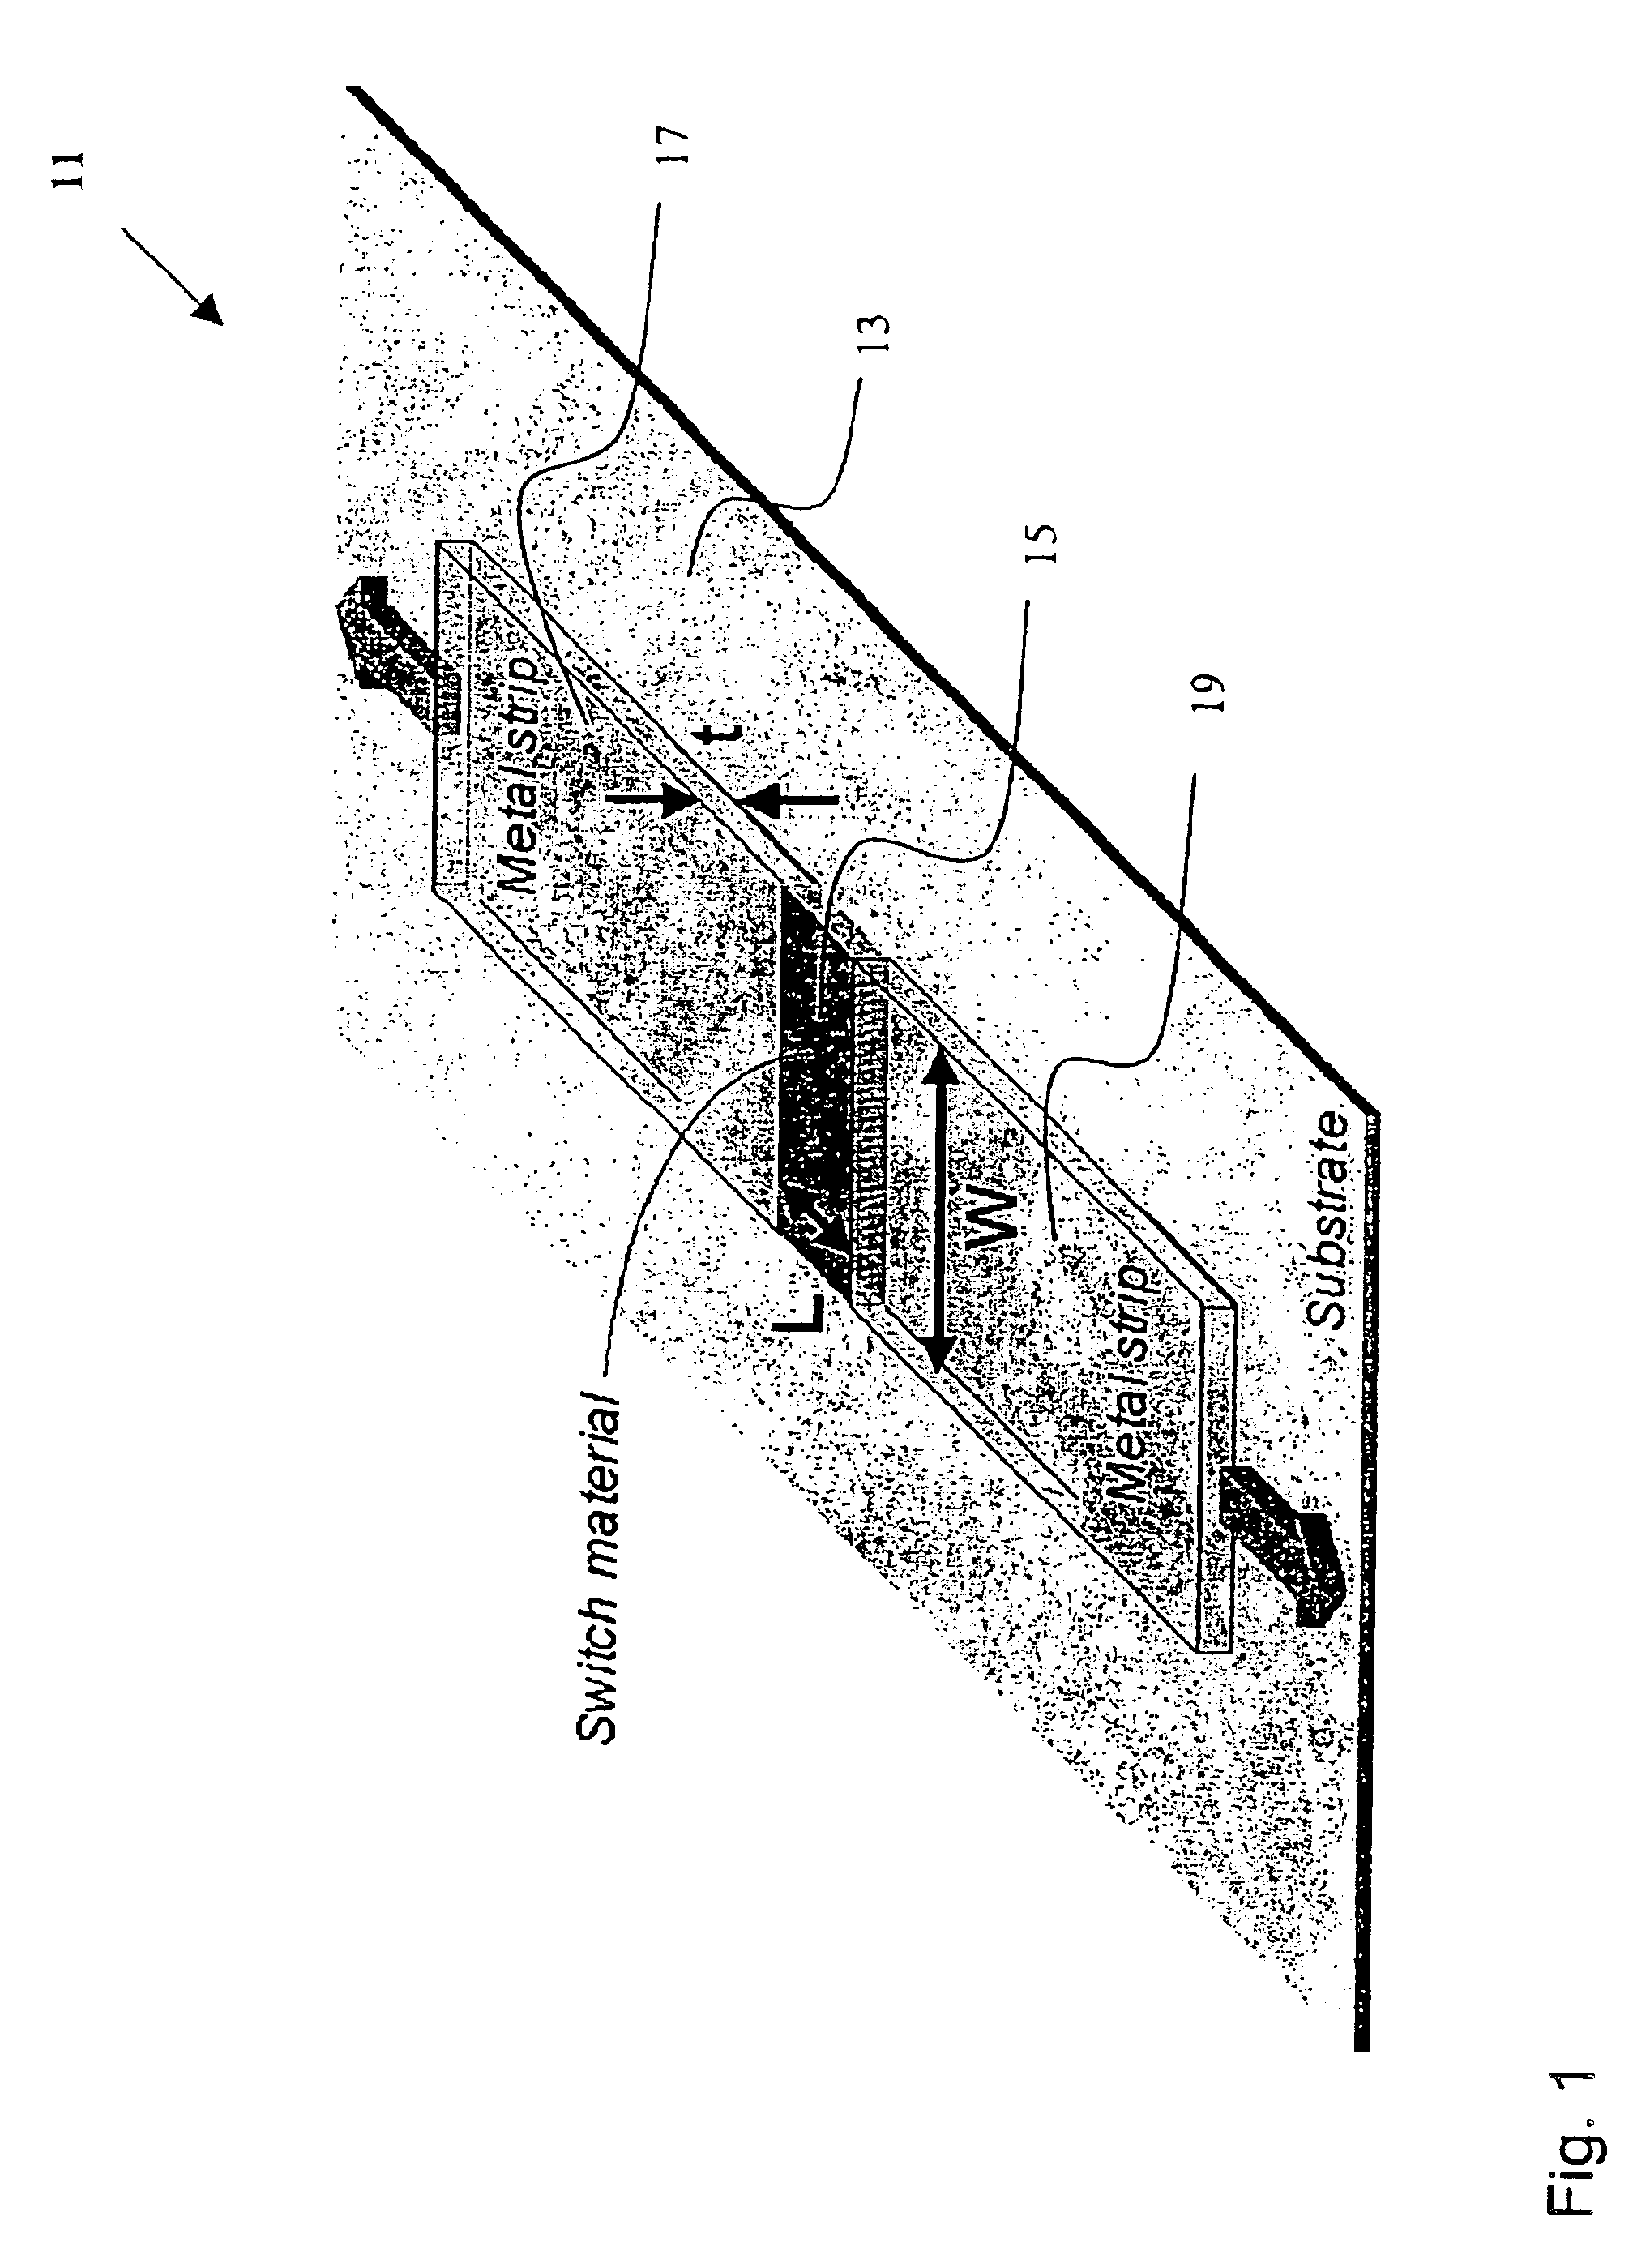 Phase change switches and circuits coupling to electromagnetic waves containing phase change switches